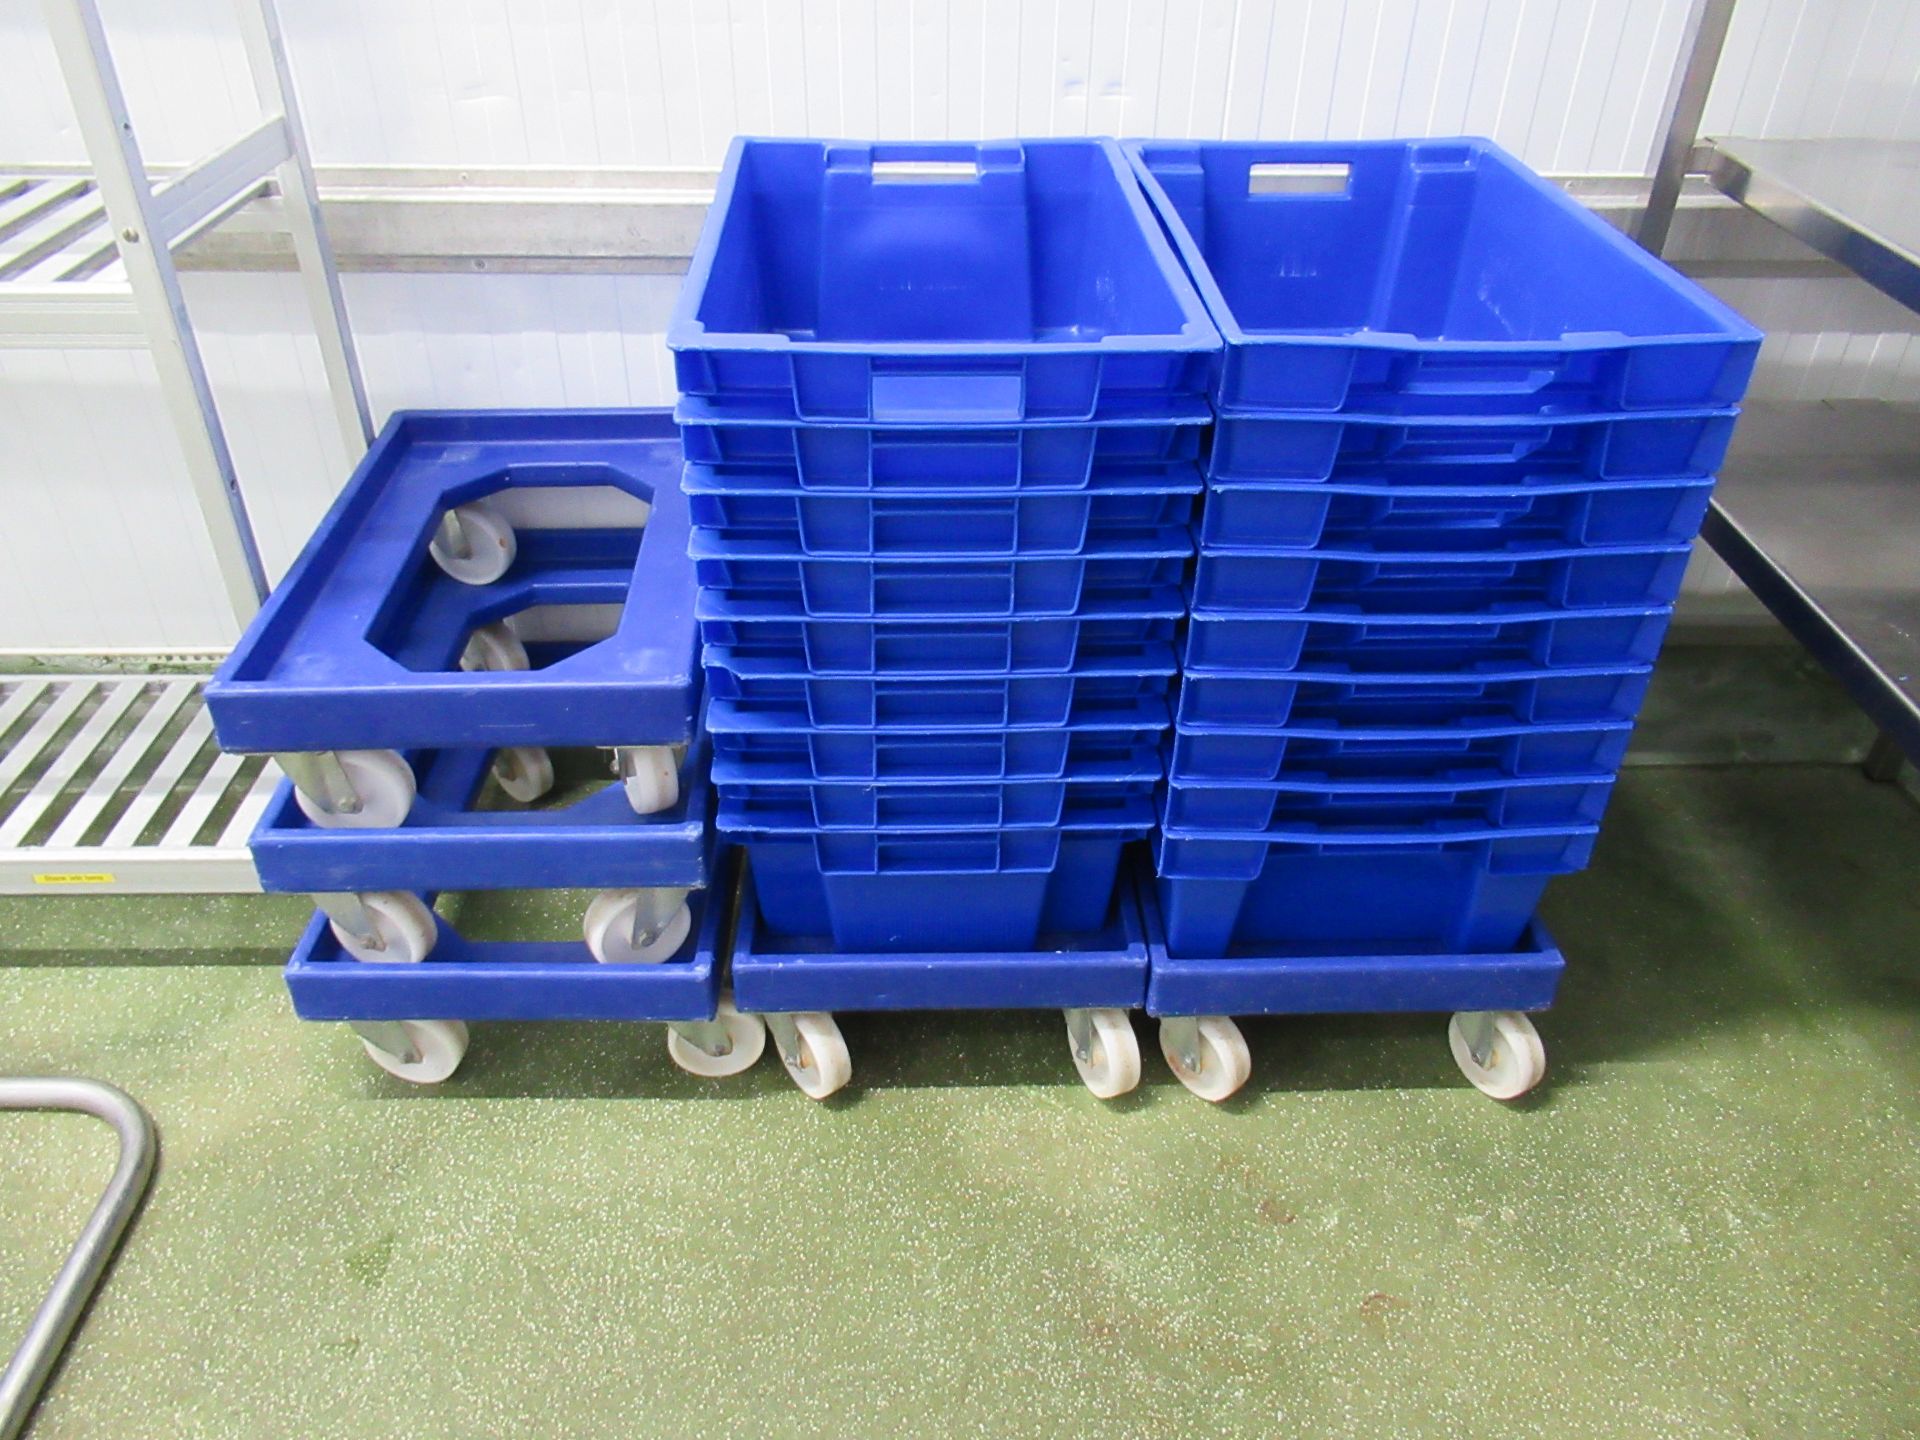 20 Blue plastic stacking boxes 600 x 400 x 200mm deep with 5 dollies